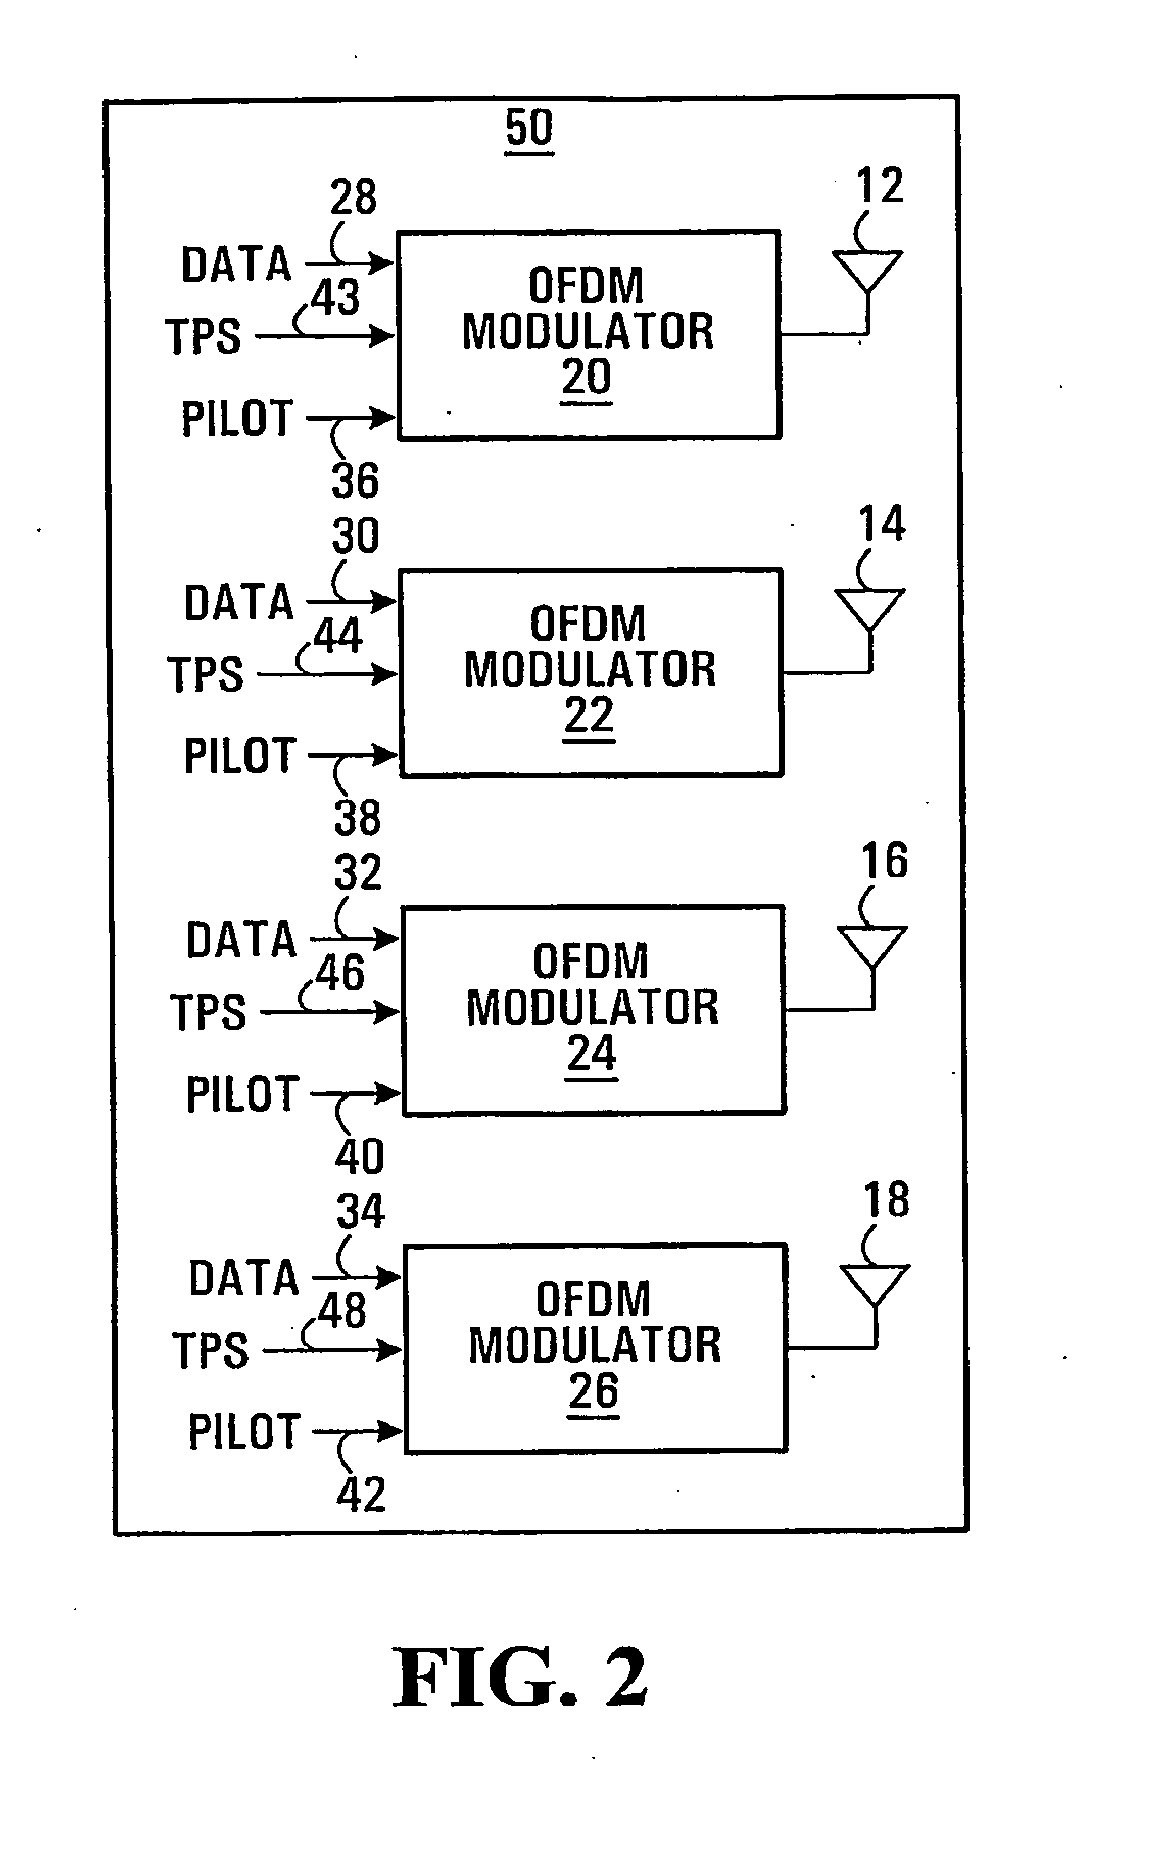 Pilot Design for OFDM Systems with Four Transmit Antennas